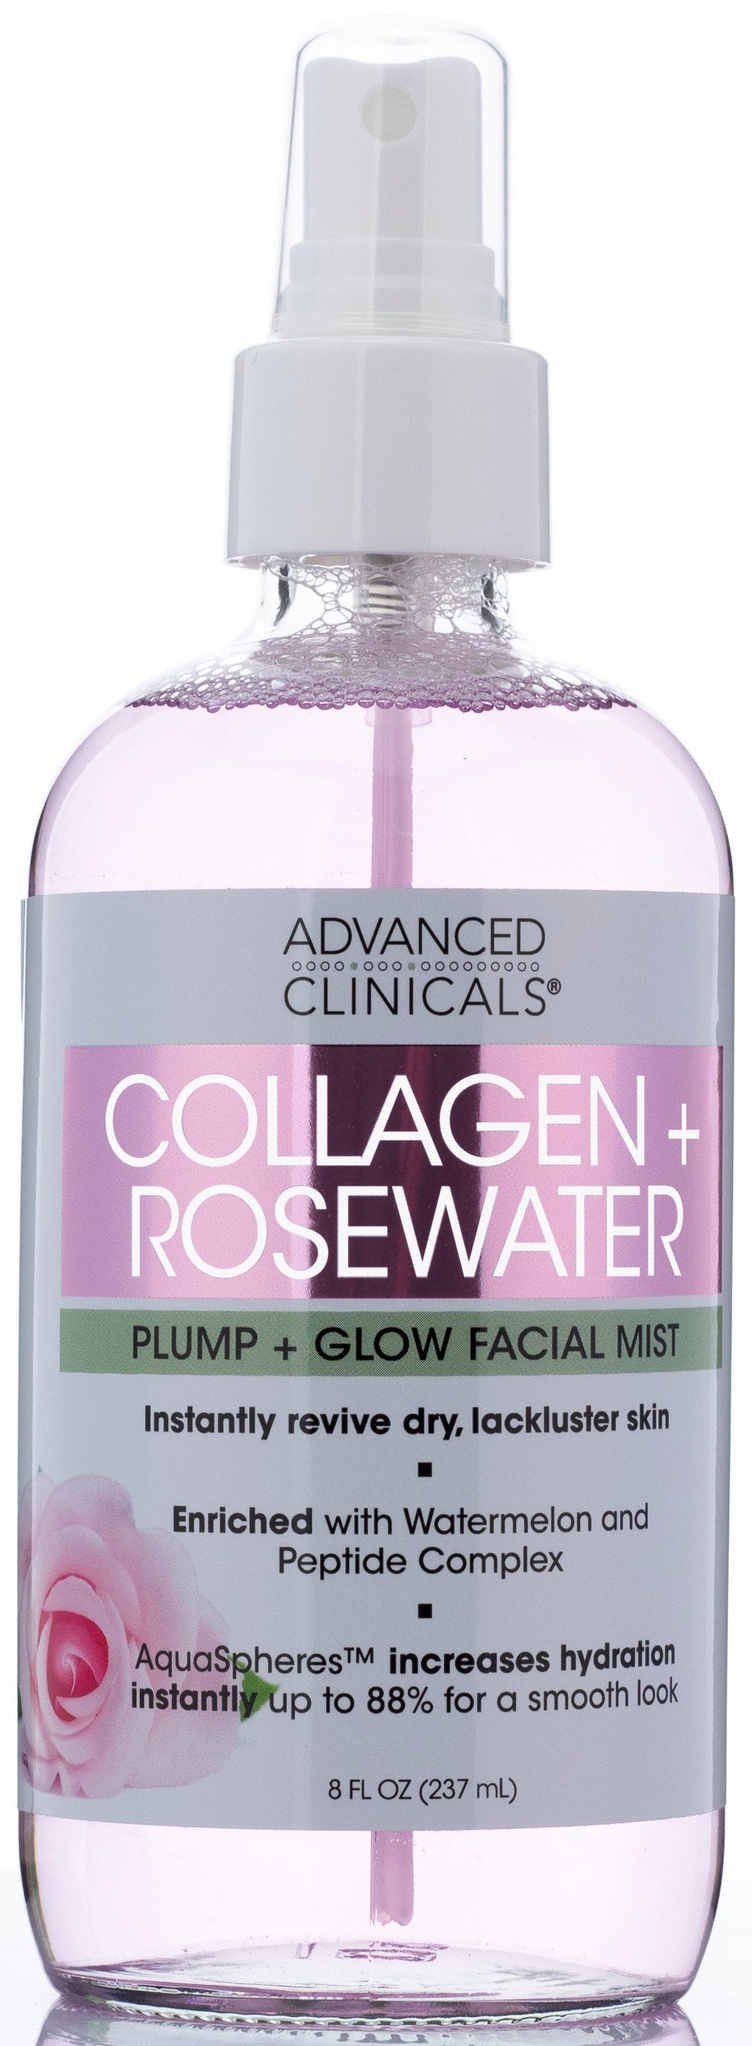 Advanced Clinicals Collagen Rosewater Face Spray